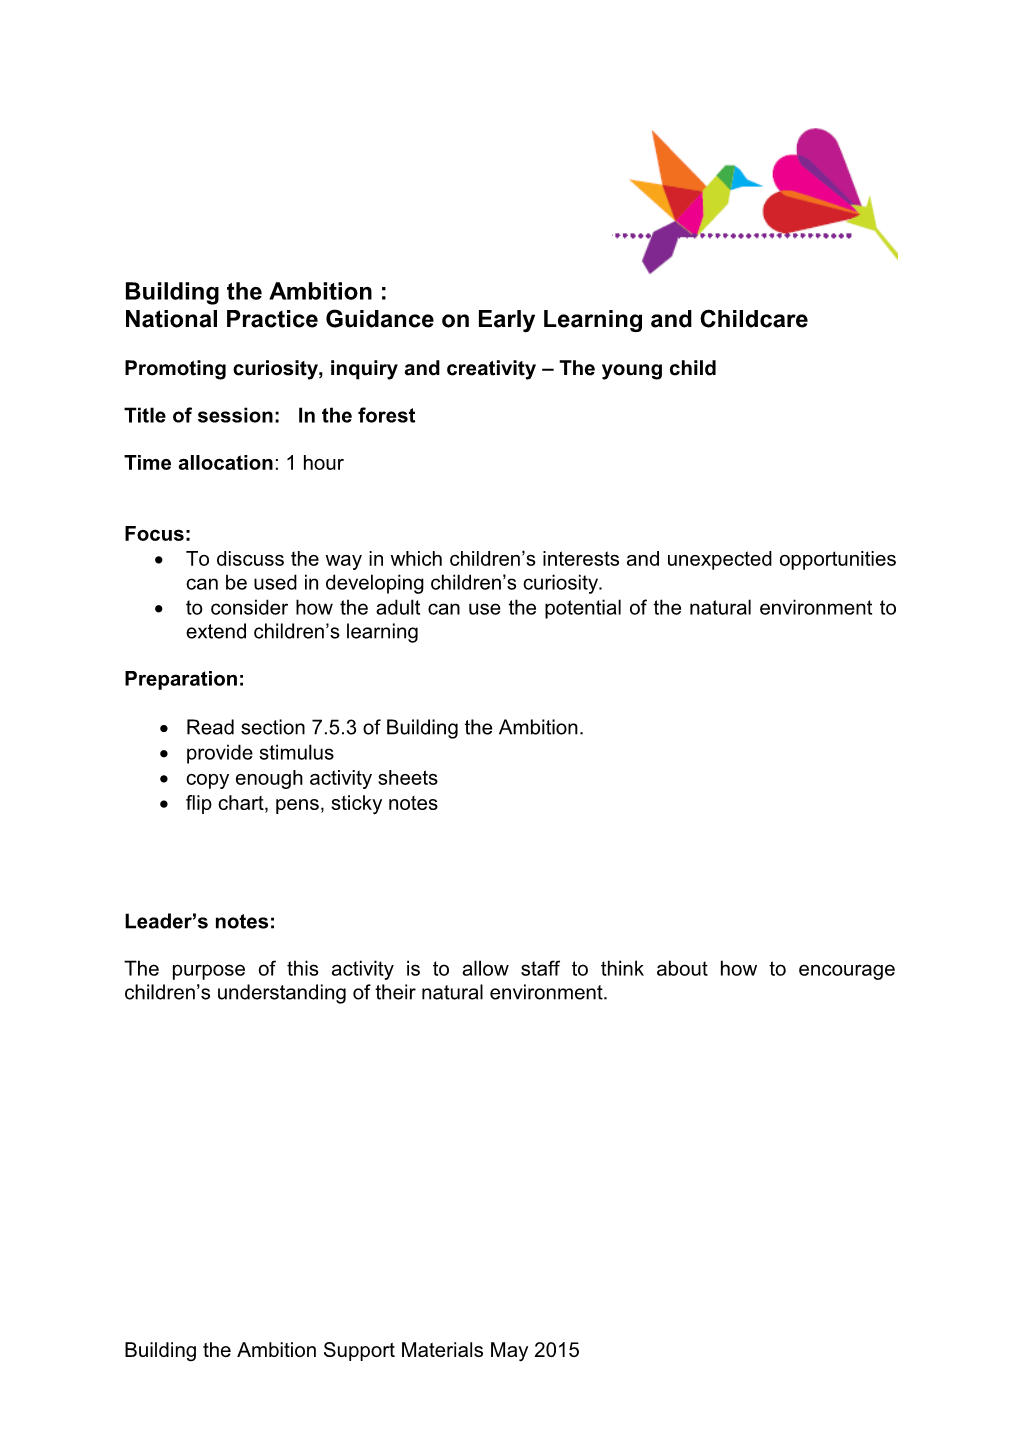 National Practice Guidance on Early Learning and Childcare